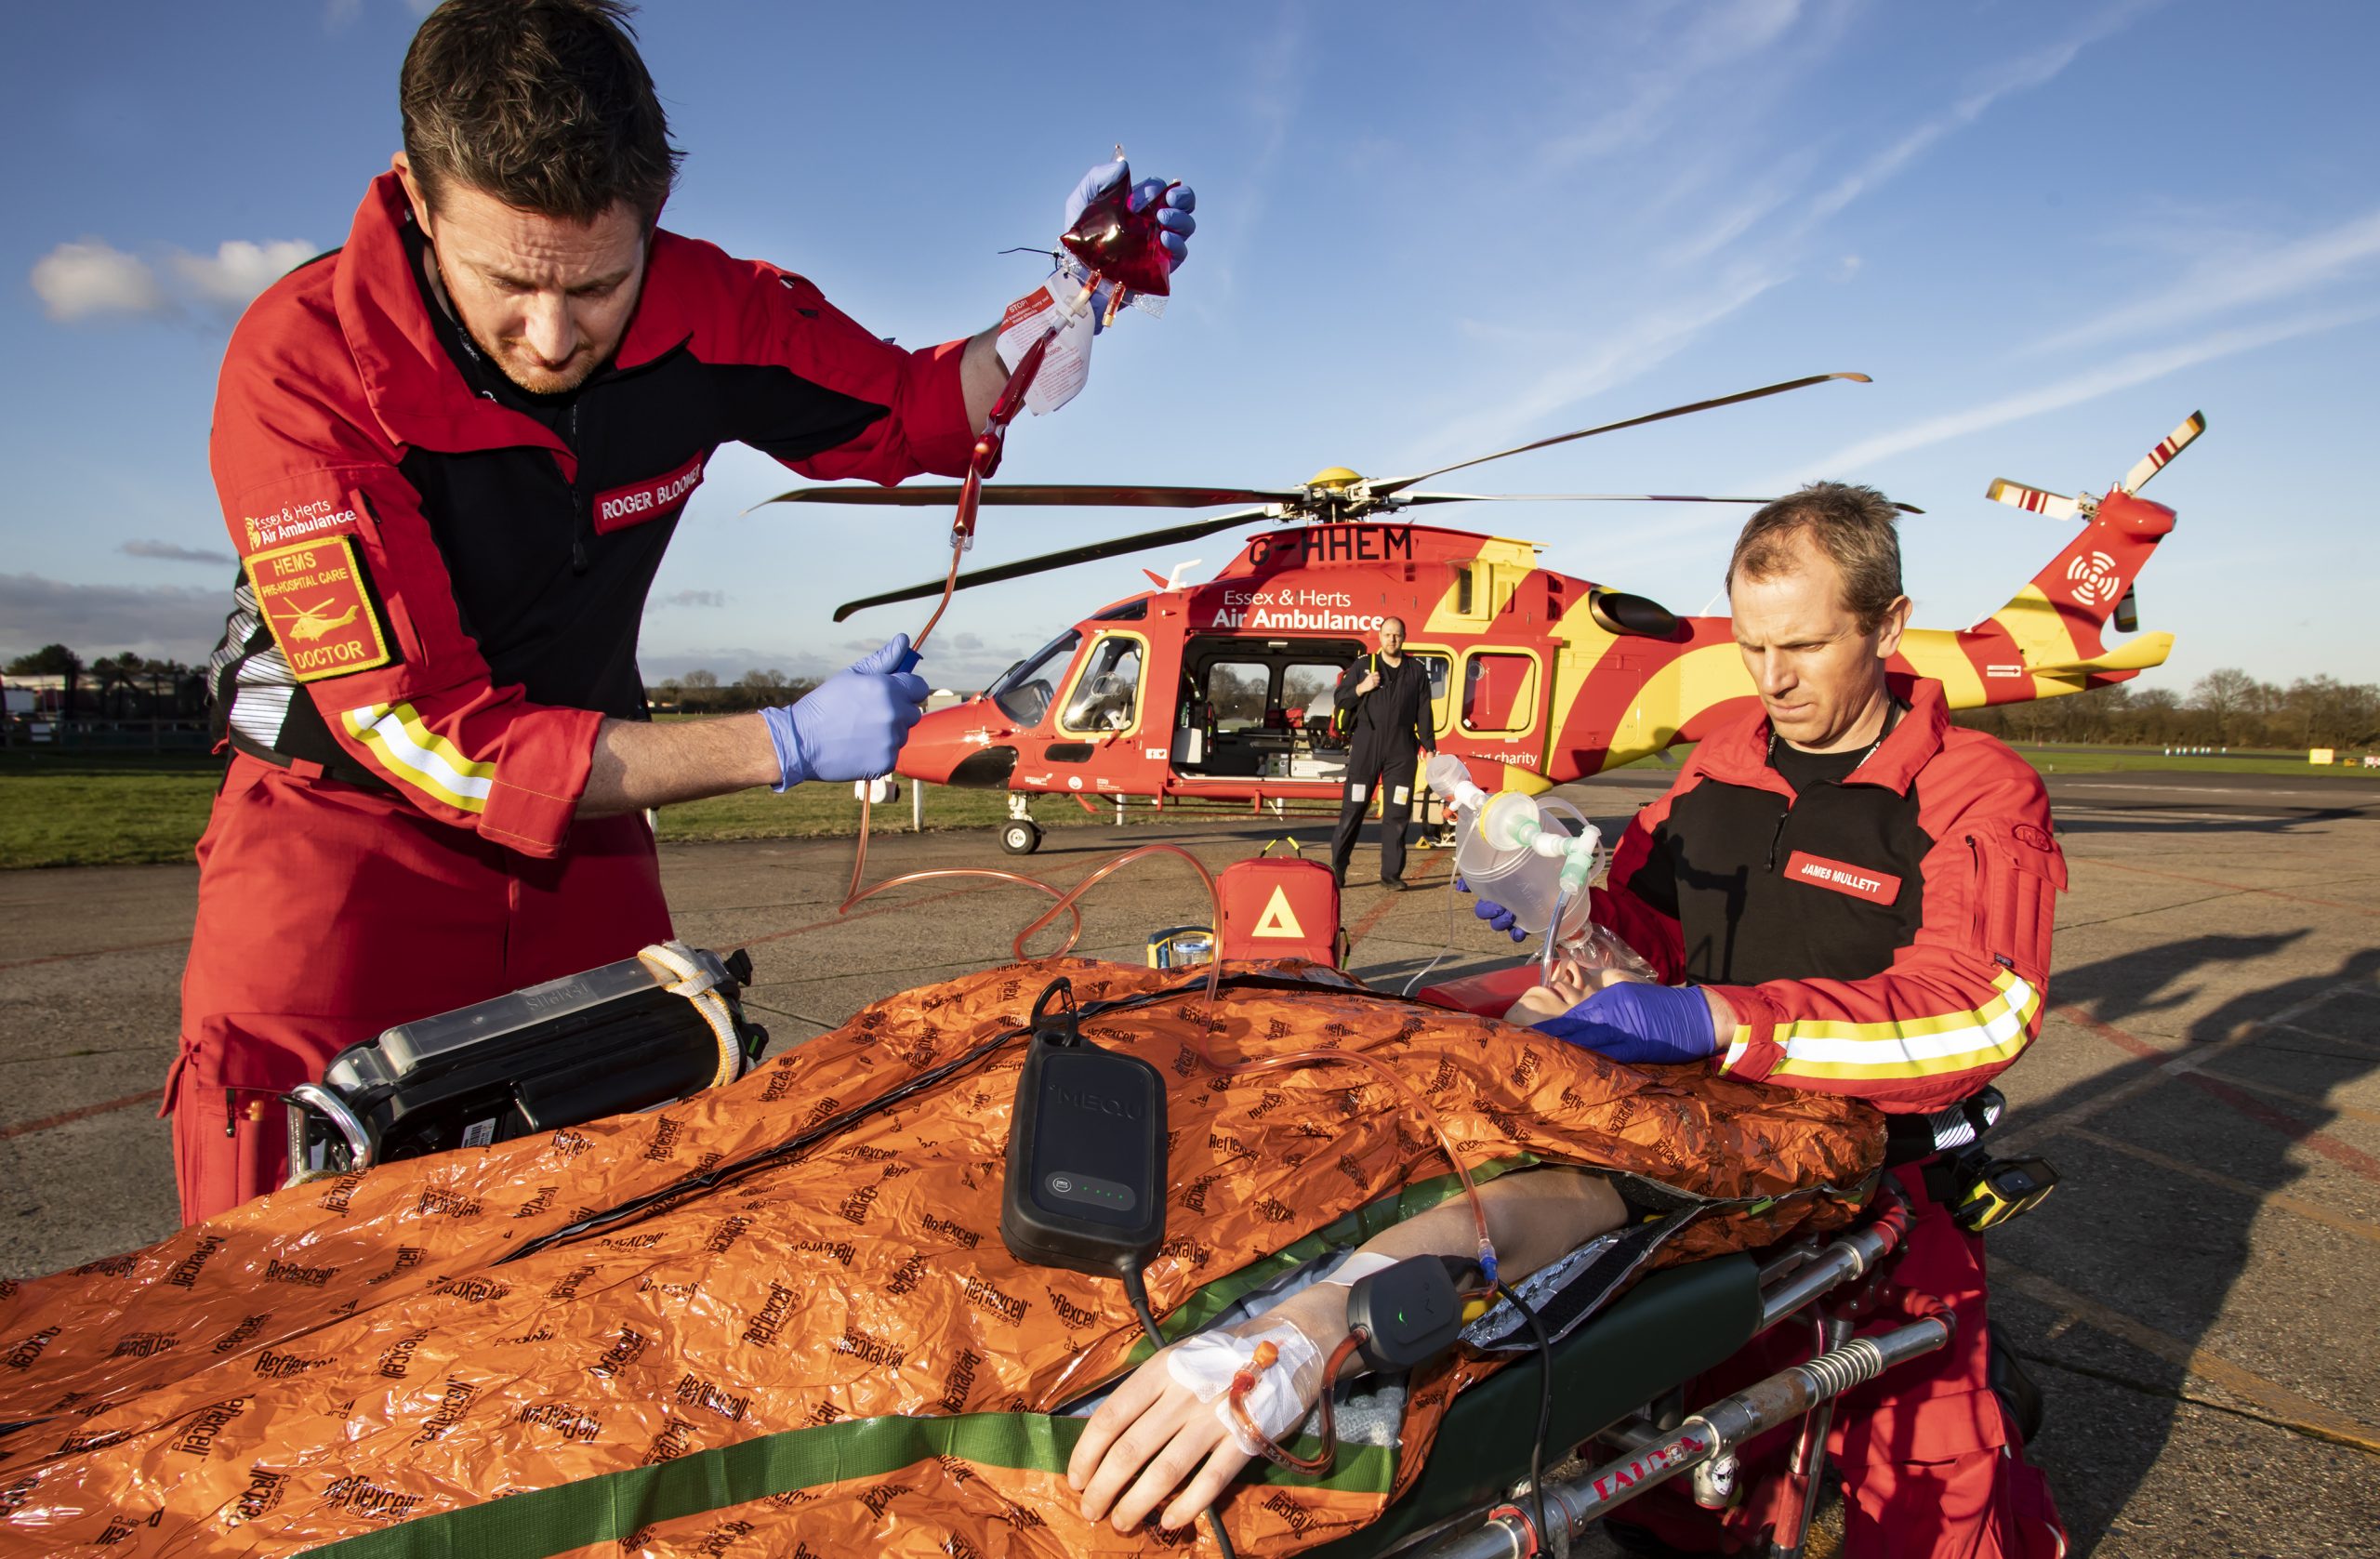 Essex & Herts Air Ambulance reaches 1000 days carrying Blood on Board Milestone